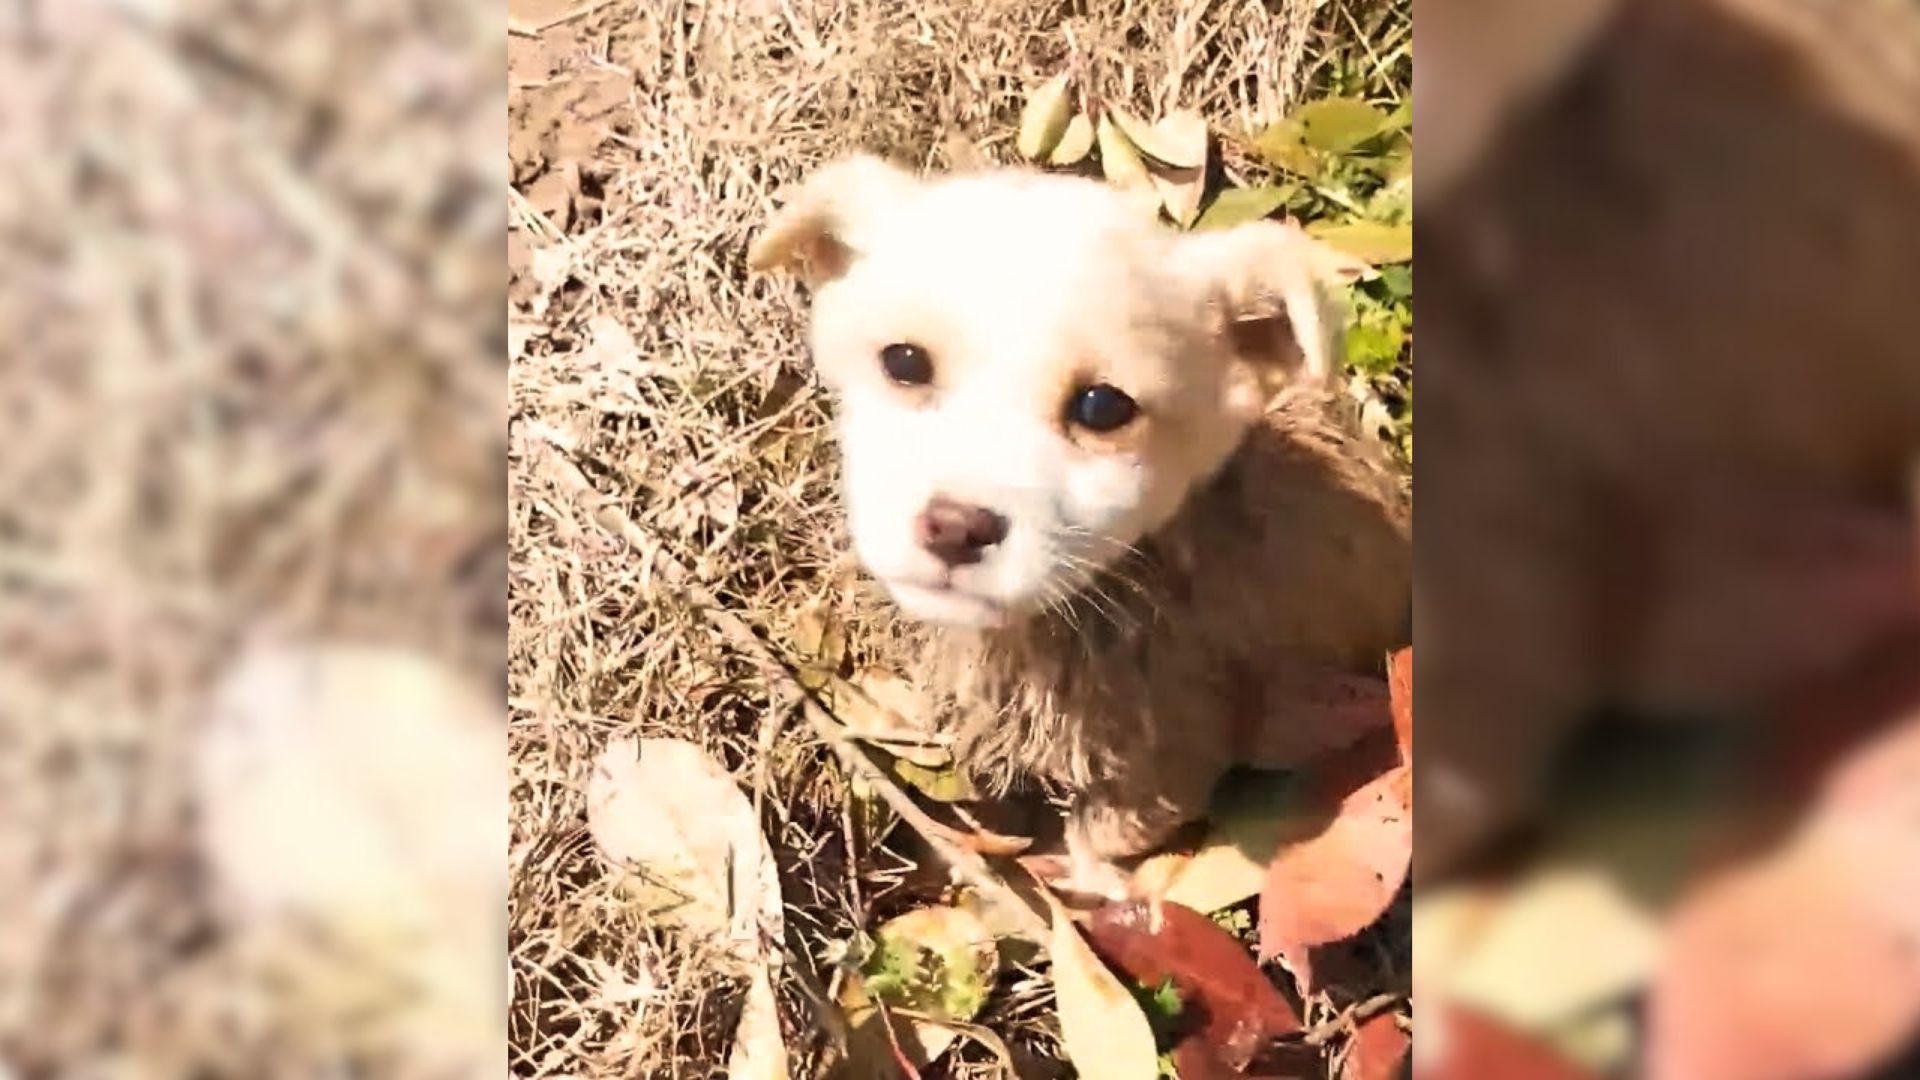 Abandoned Puppy Was Lying In The Mud When A Kind Man Noticed Him And Decided To Help